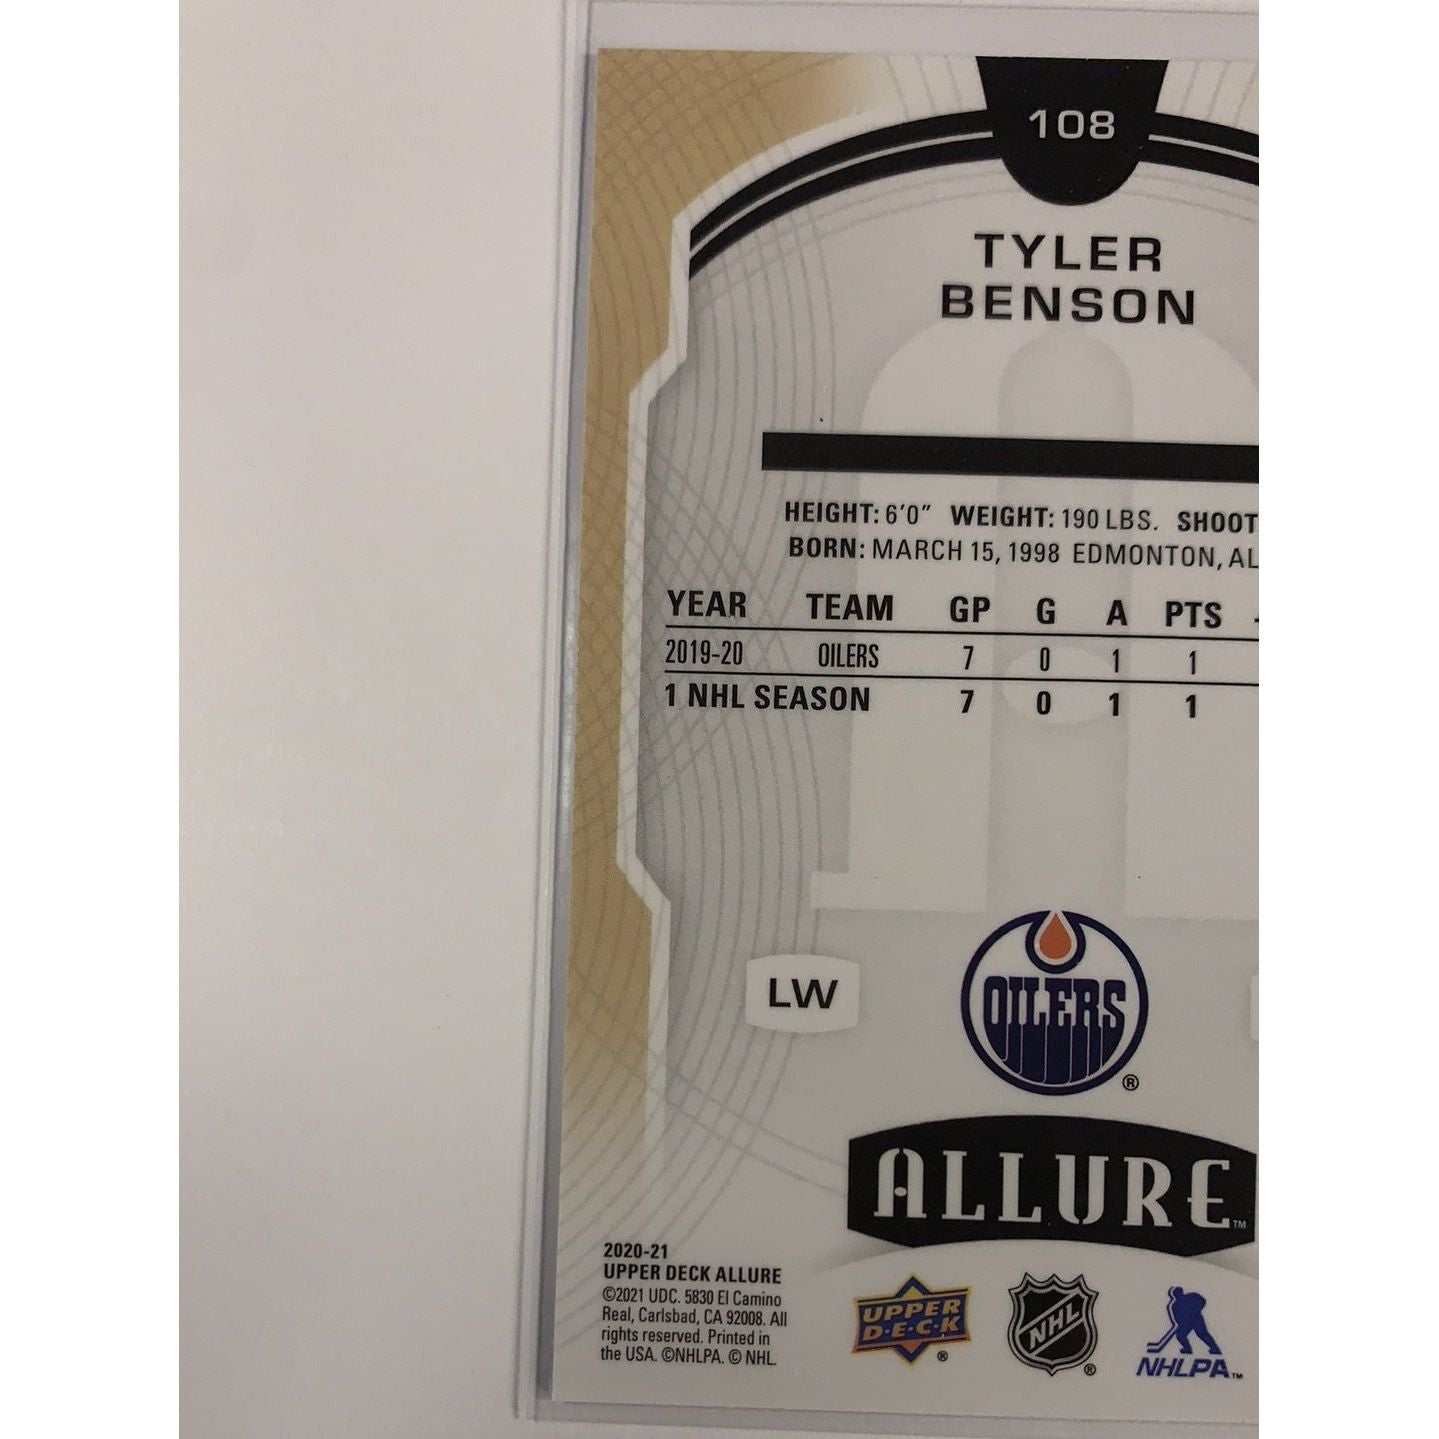  2020-21 Allure Tyler Benson Rookie Card  Local Legends Cards & Collectibles